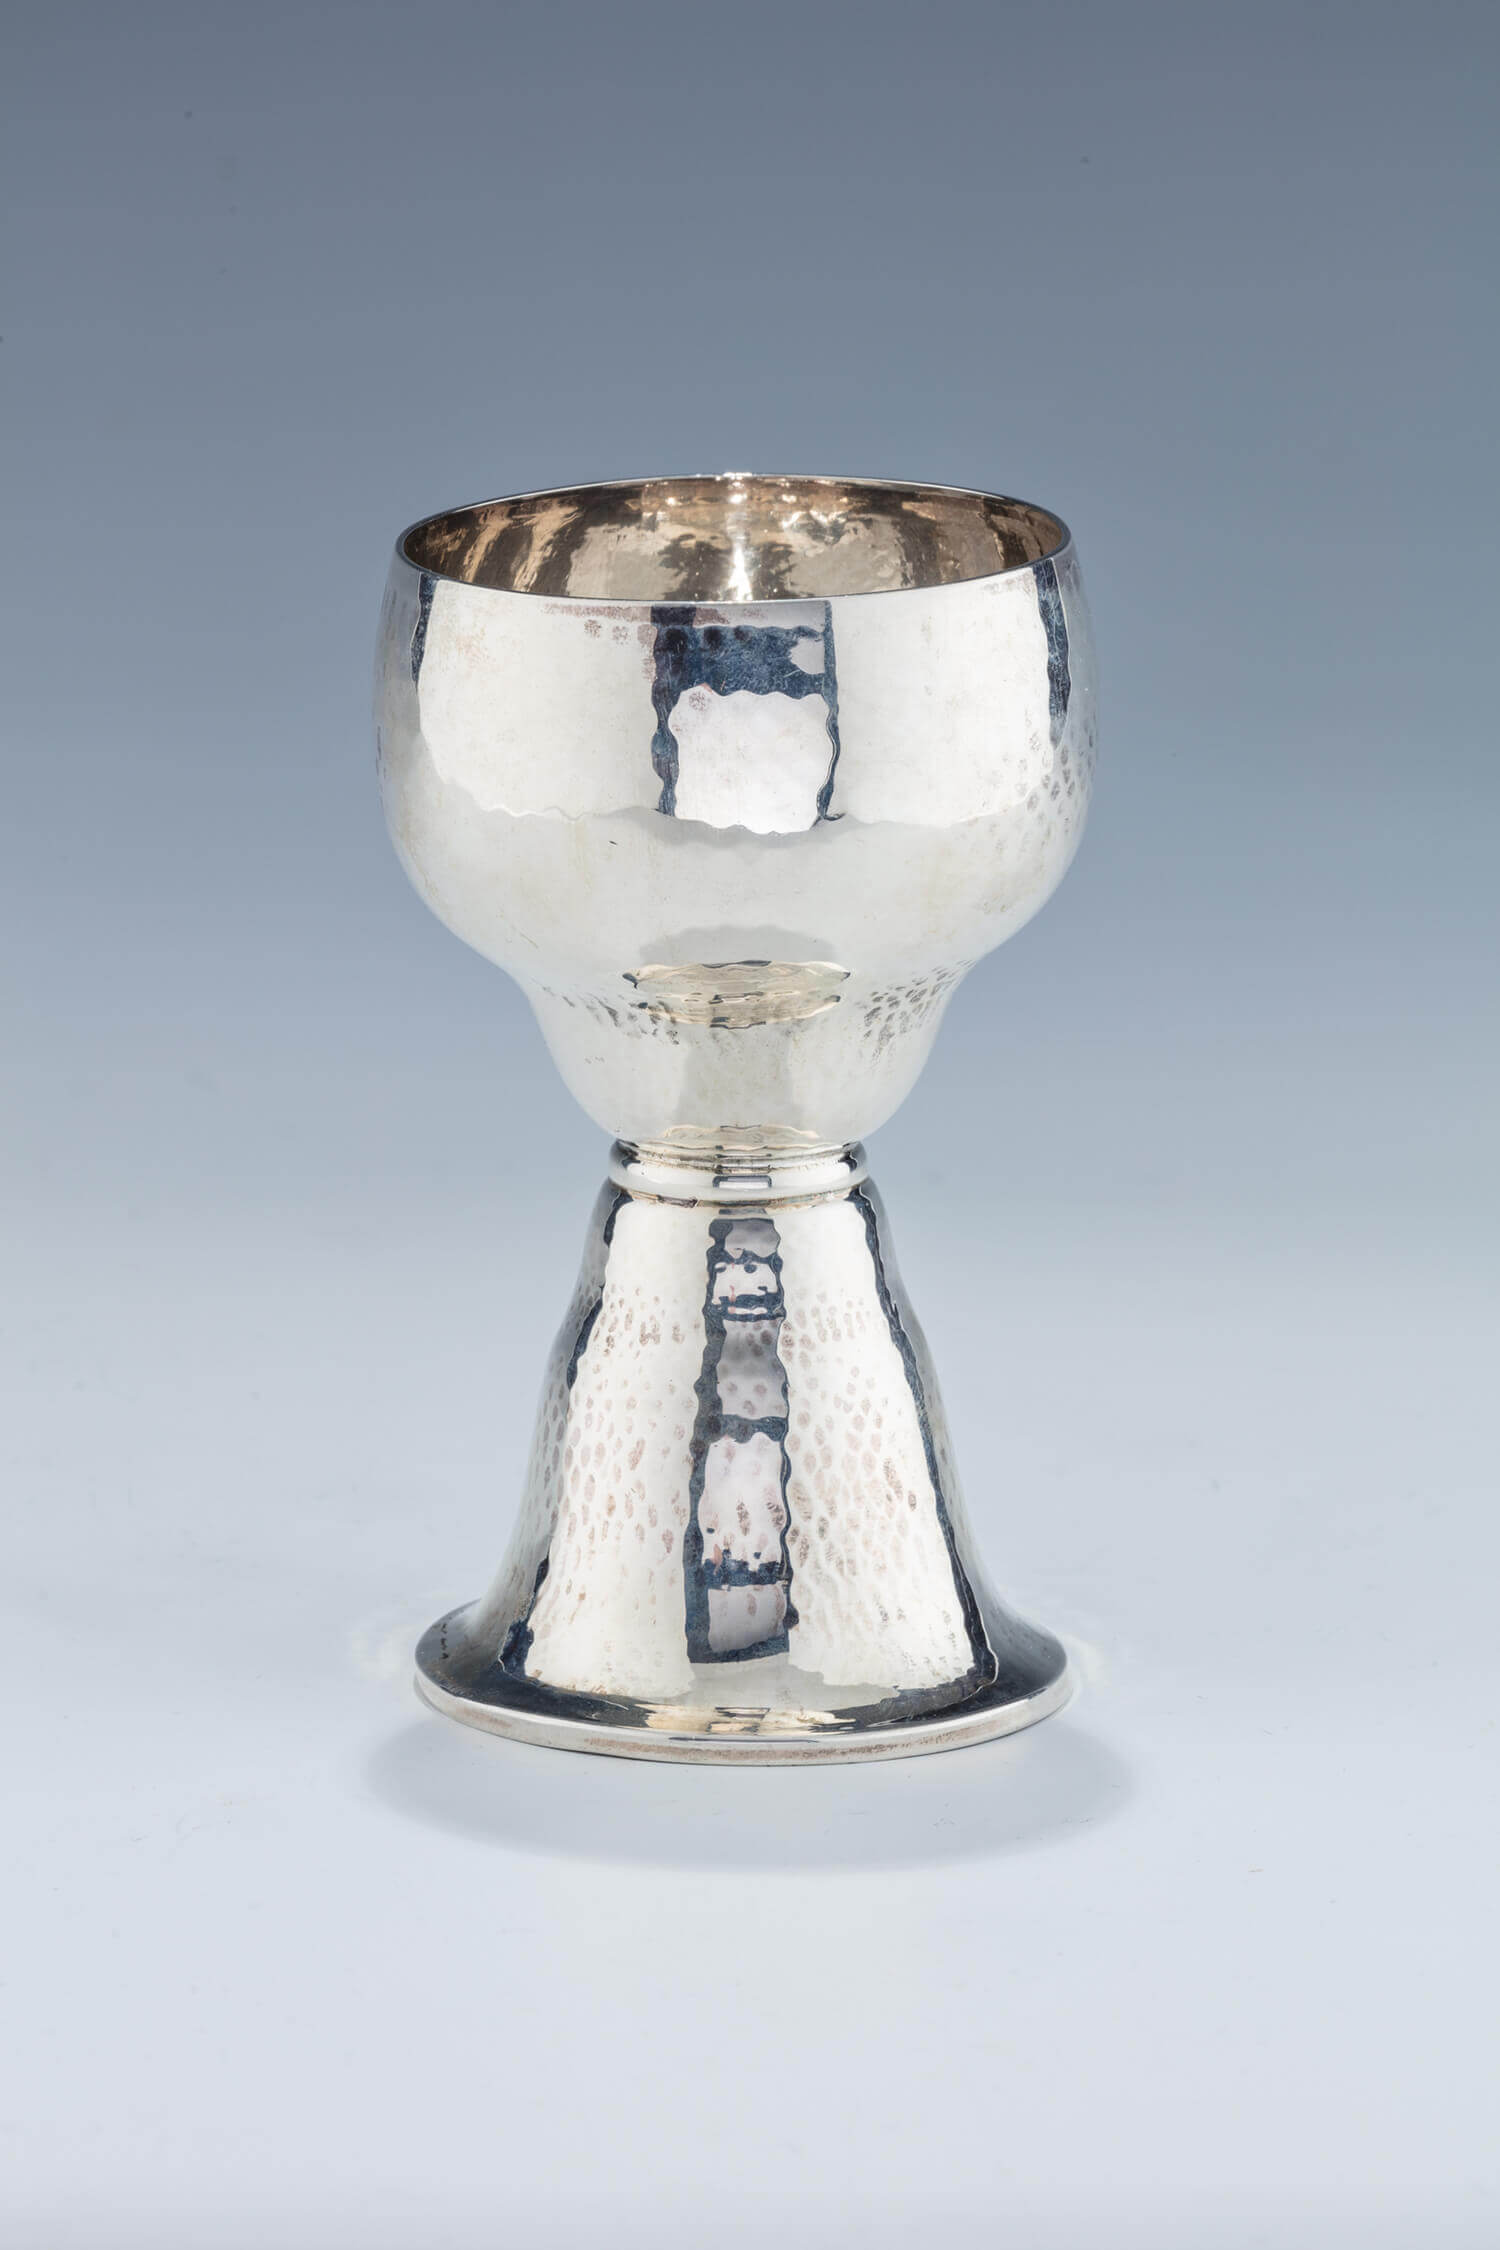 023. A LARGE HAND HAMMERED KIDDUSH CUP BY LAZARUS POSEN